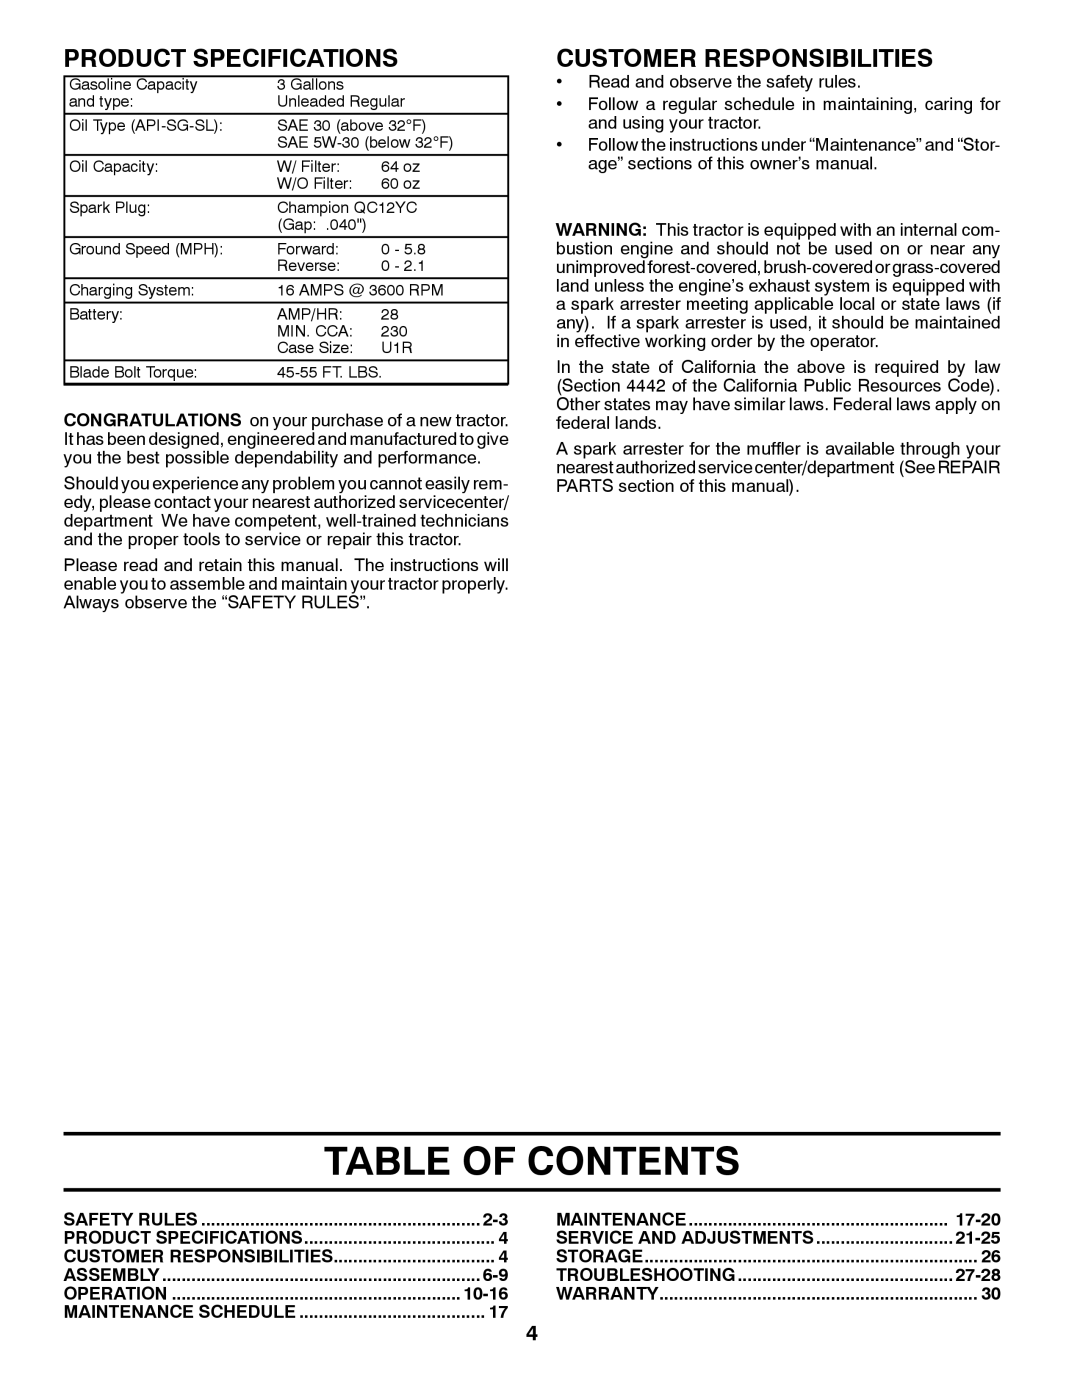 Poulan 532 43 34-32 manual Table Of Contents, Product Specifications, Customer Responsibilities, 10-16, 17-20, 21-25, 27-28 